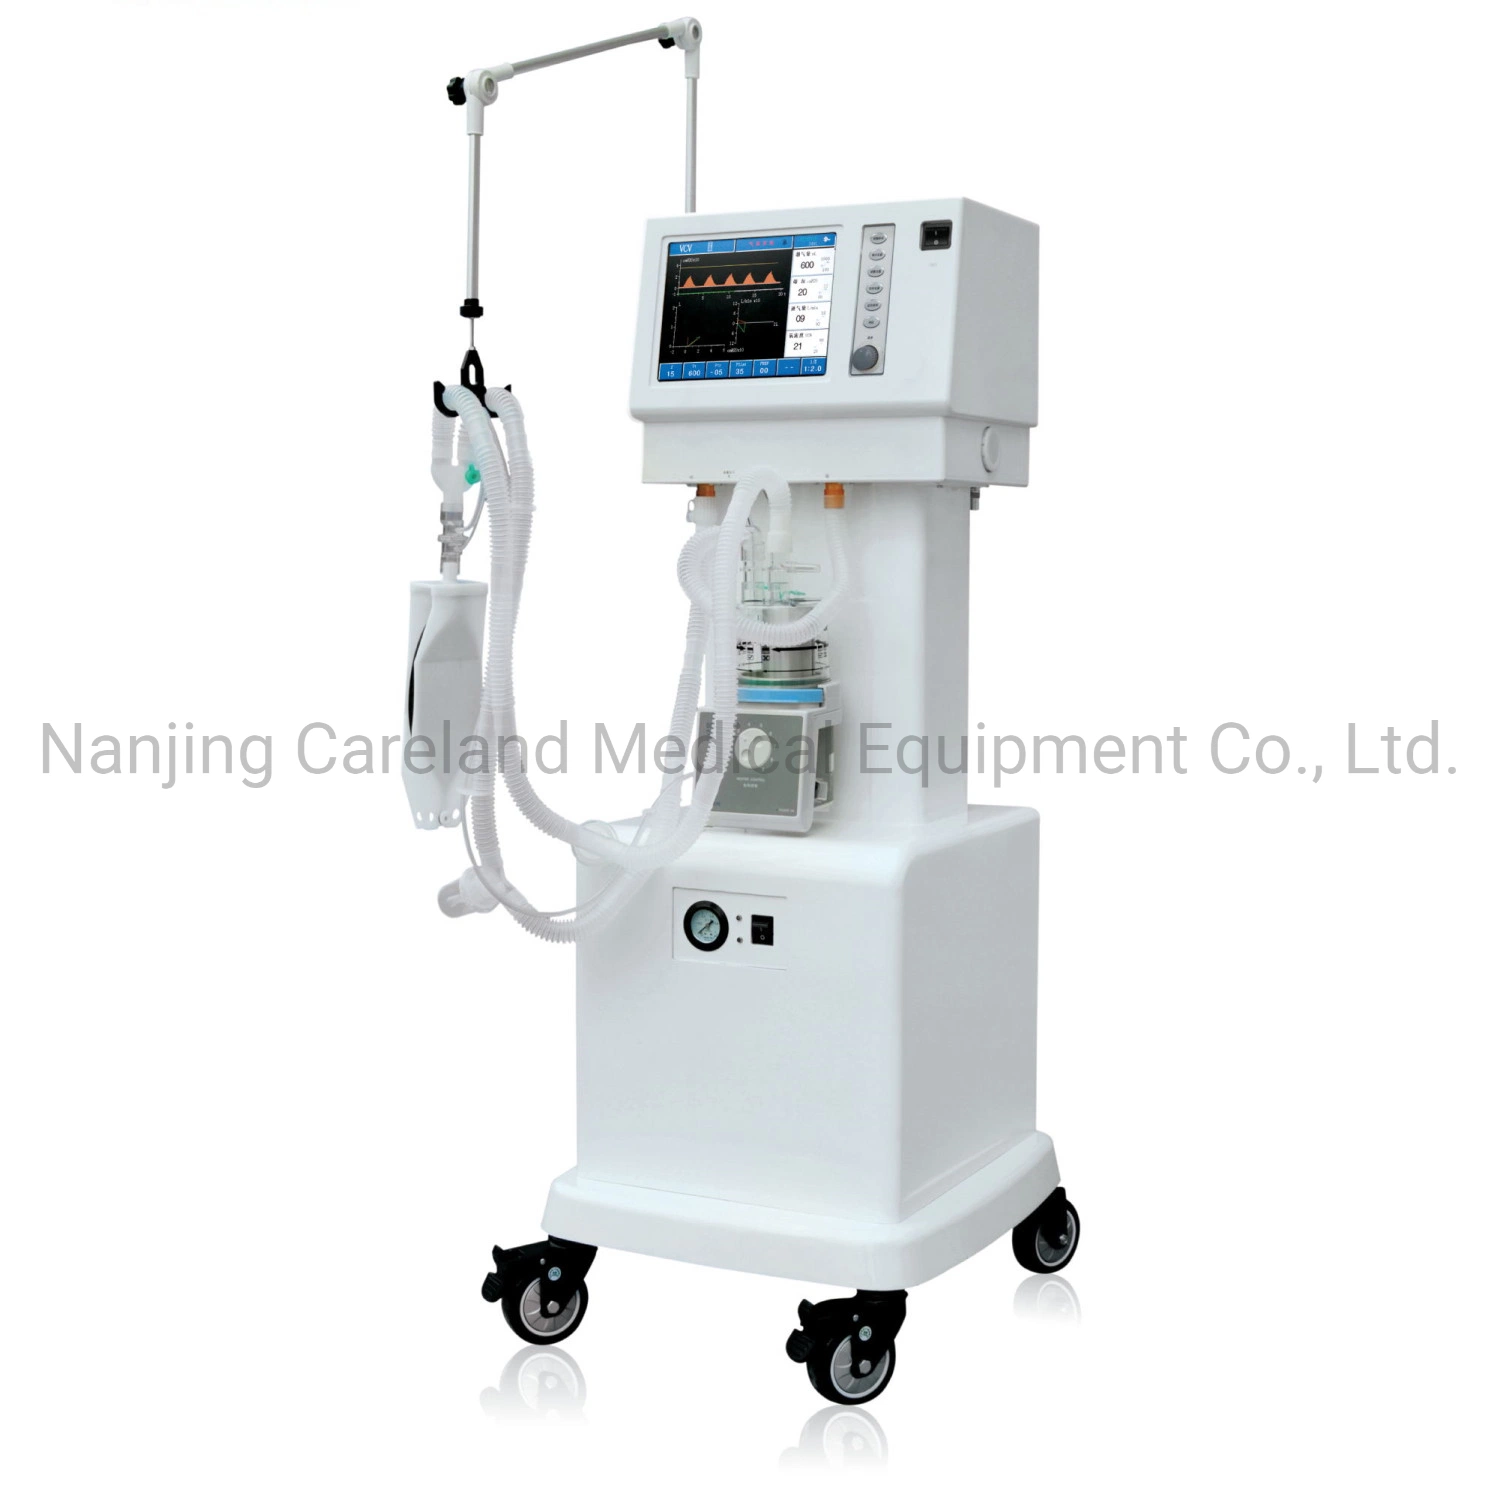 Hospital Medical Ventilating Infant and Adult CPAP Breathing Ventilator Machine for ICU with Air Compressor